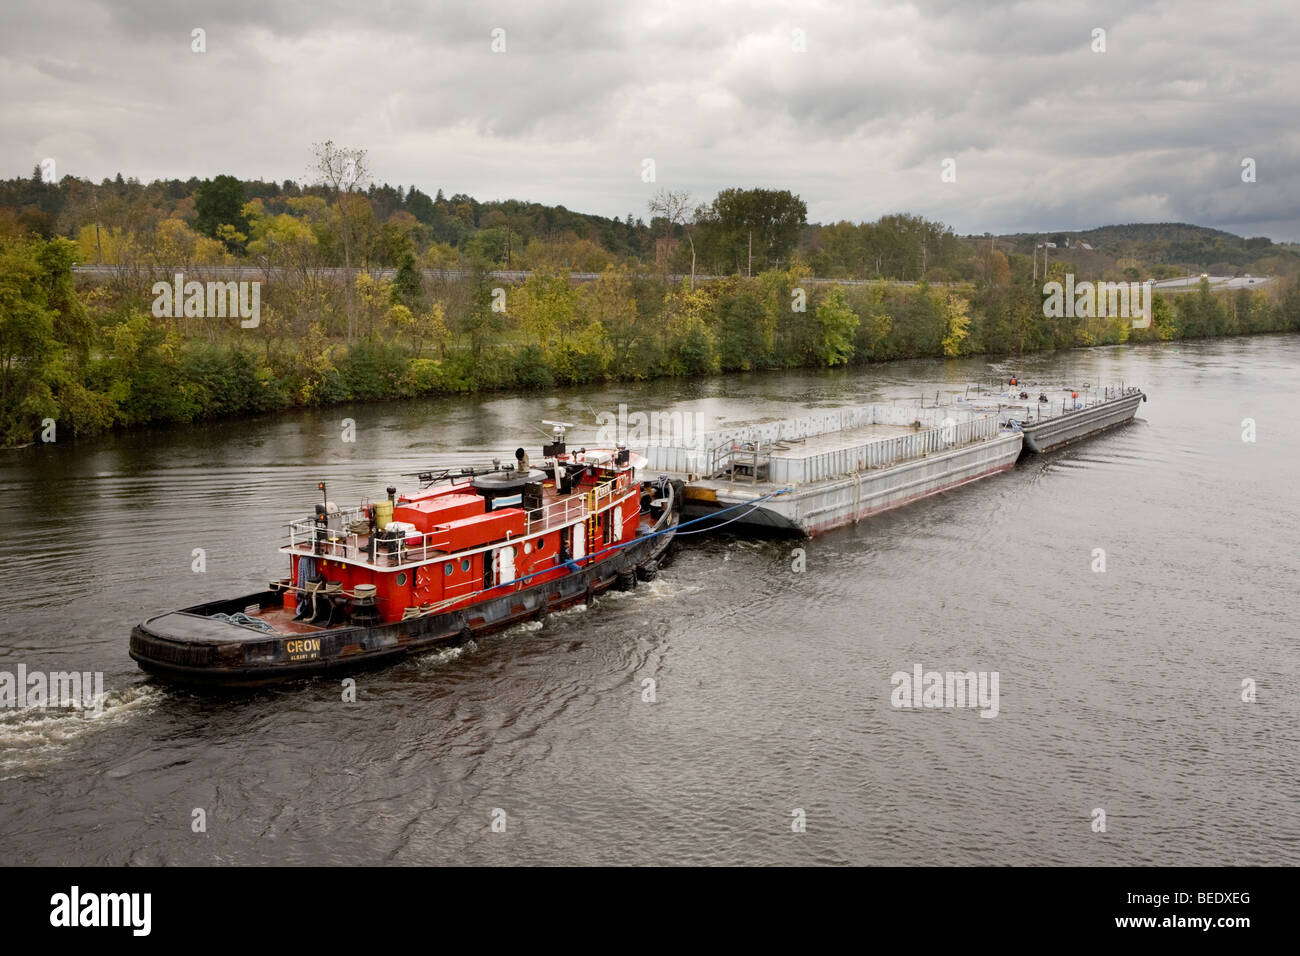 The tug boat Crow pushing two work barges westbound on the Erie Canal Stock Photo